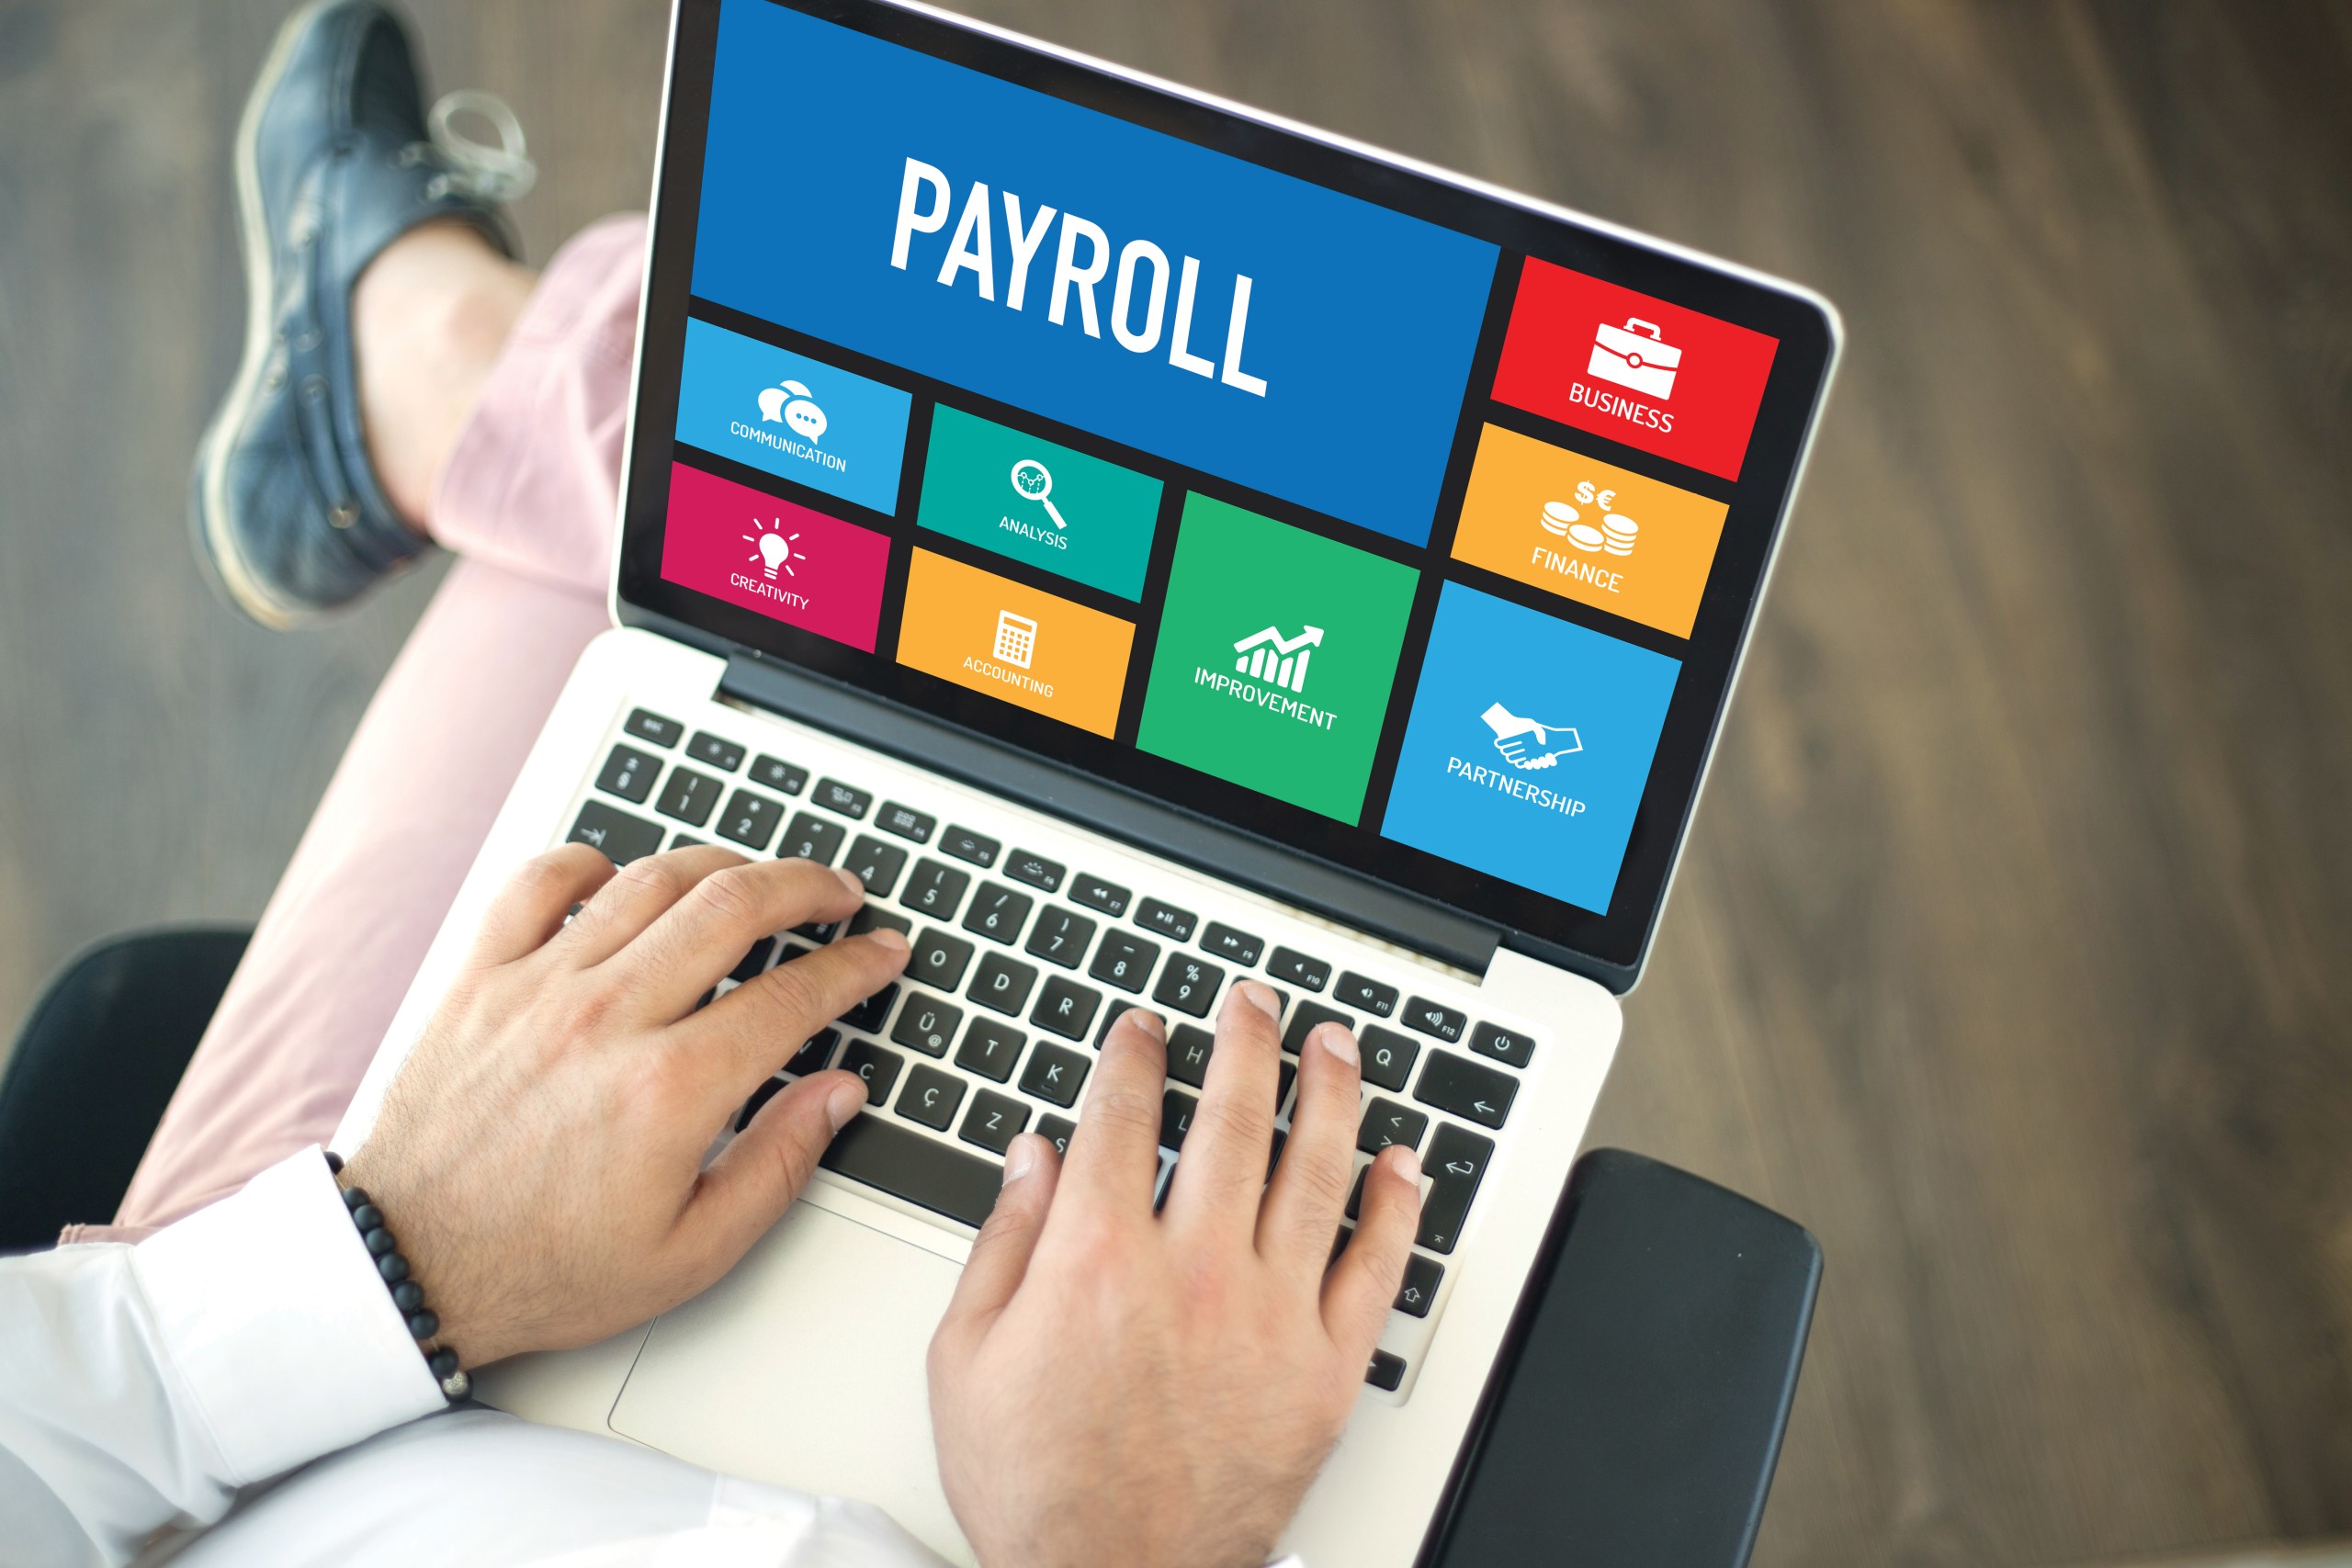 Did you know that Jiwa can integrate with payroll?